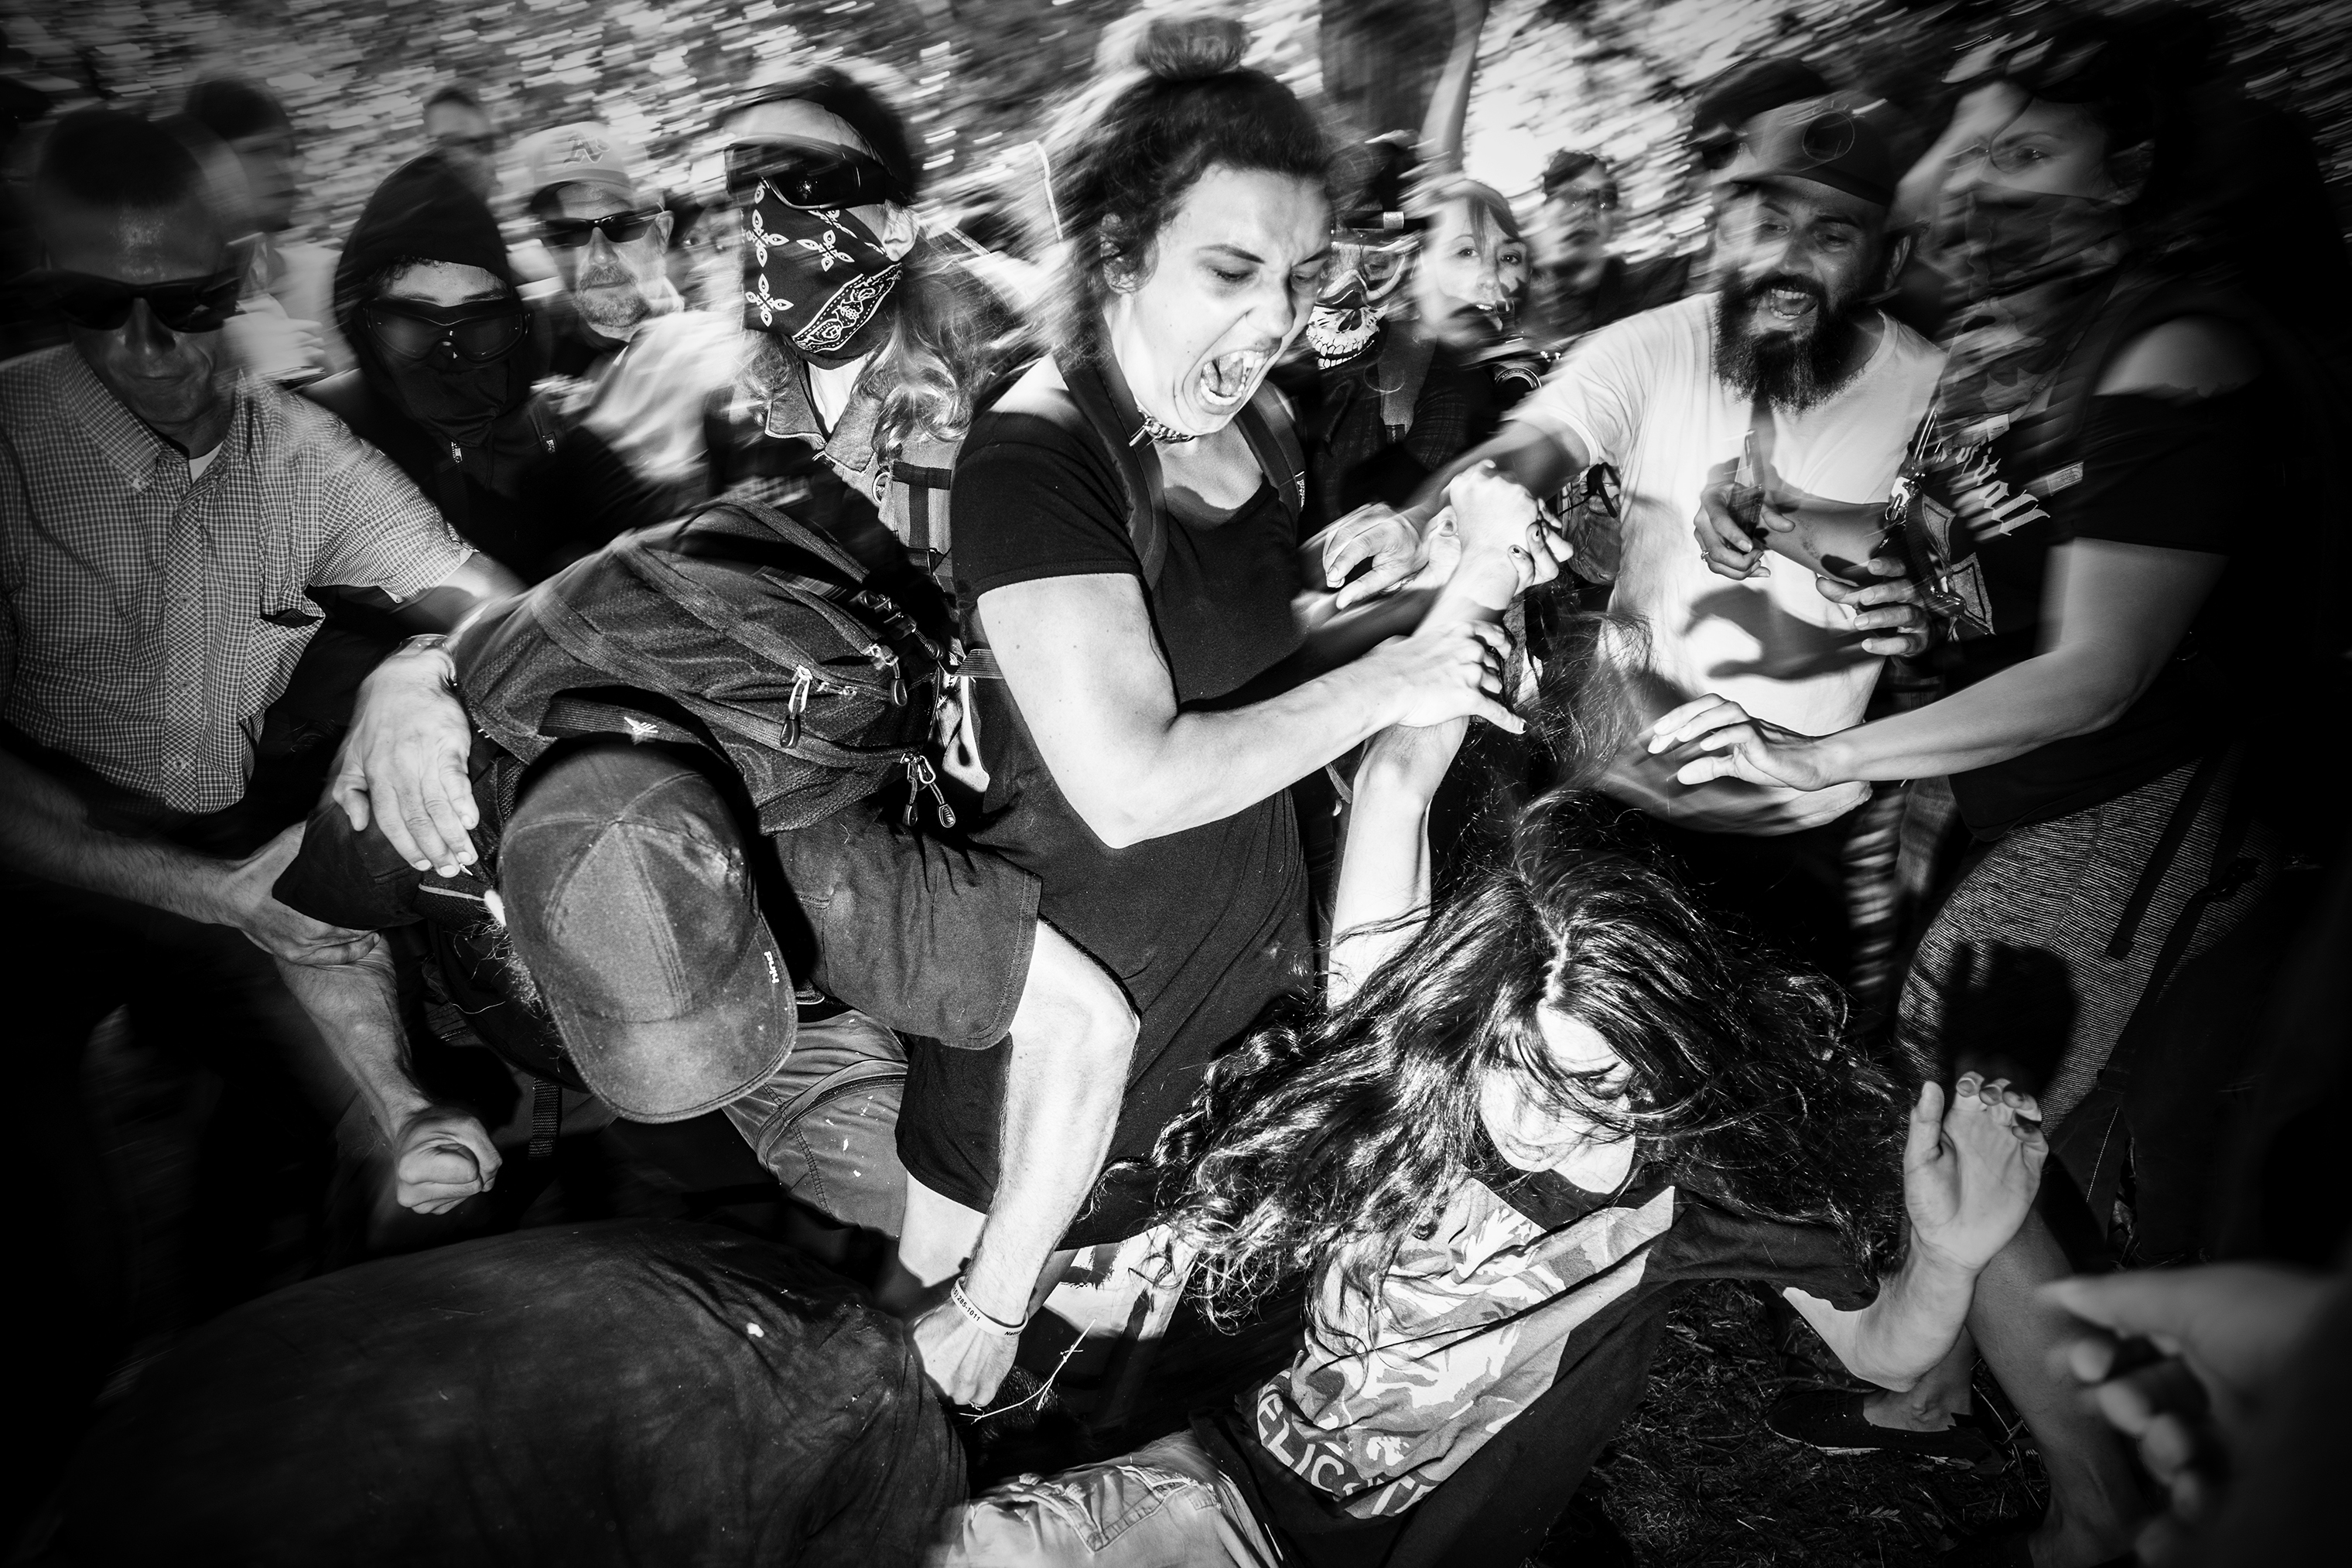 A man wearing a Trump t-shirt is attacked by members of Antifa during a cancelled 'No to Marxism' rally in Berkeley, Calif., on Aug. 27, 2017. (Mark Peterson—Redux)